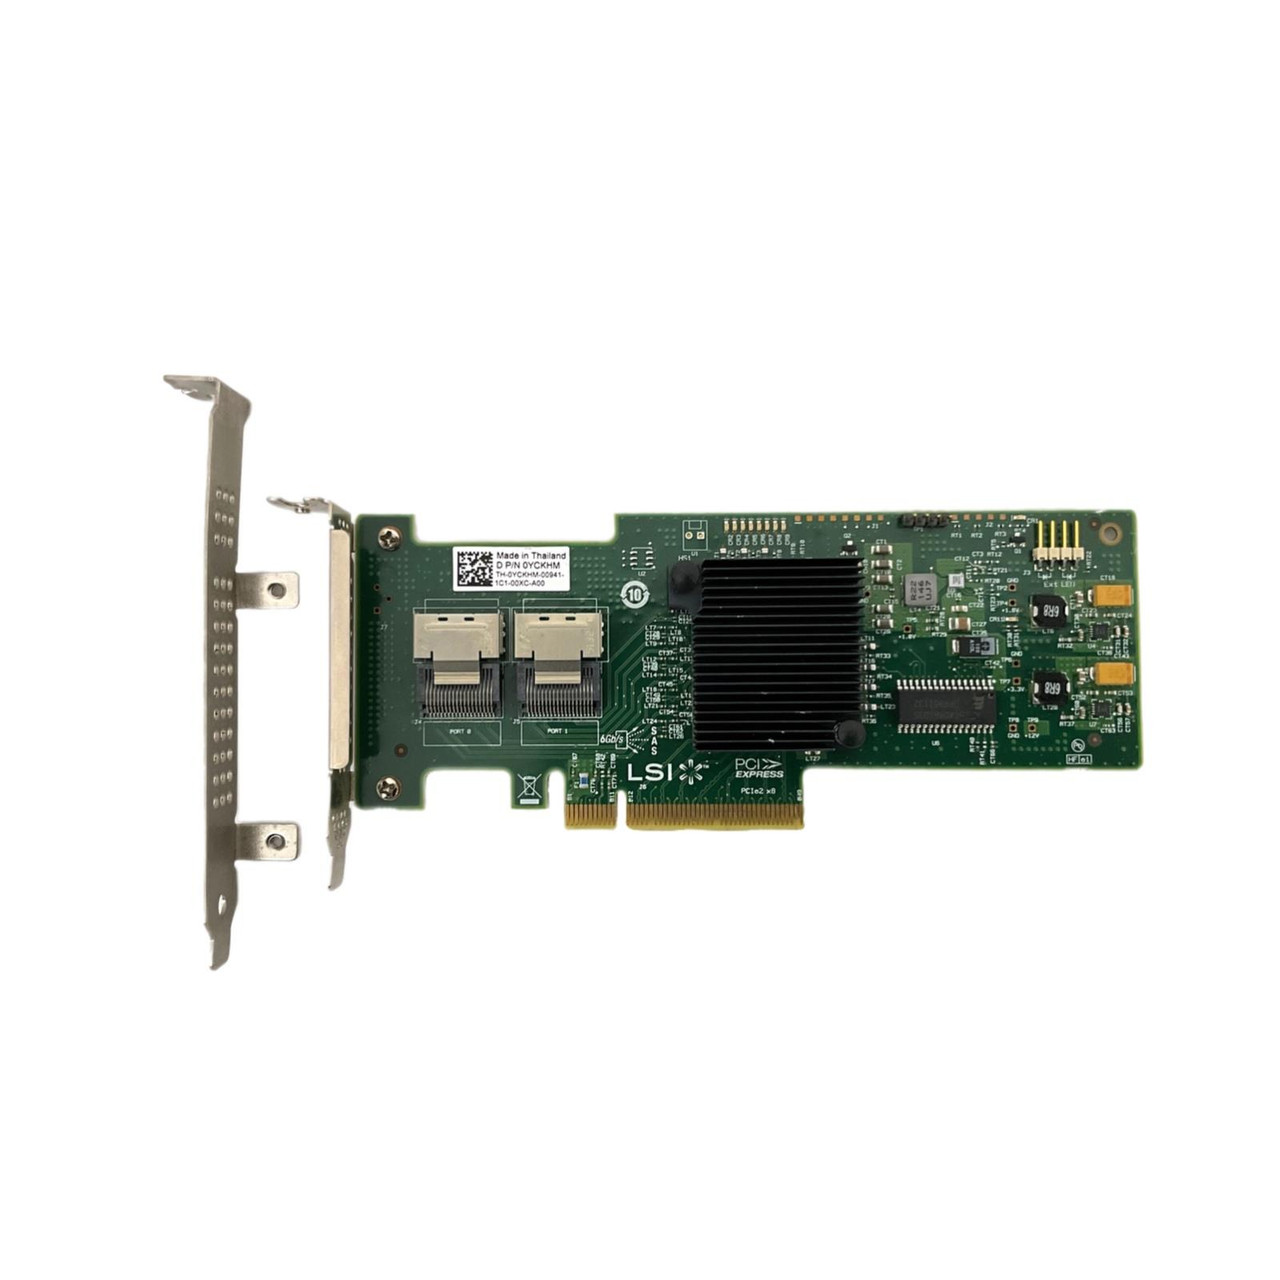 LSI 9210-8i 8-port 6Gbps SAS-2 ZFS JBOD IT-Mode w/ Low and High